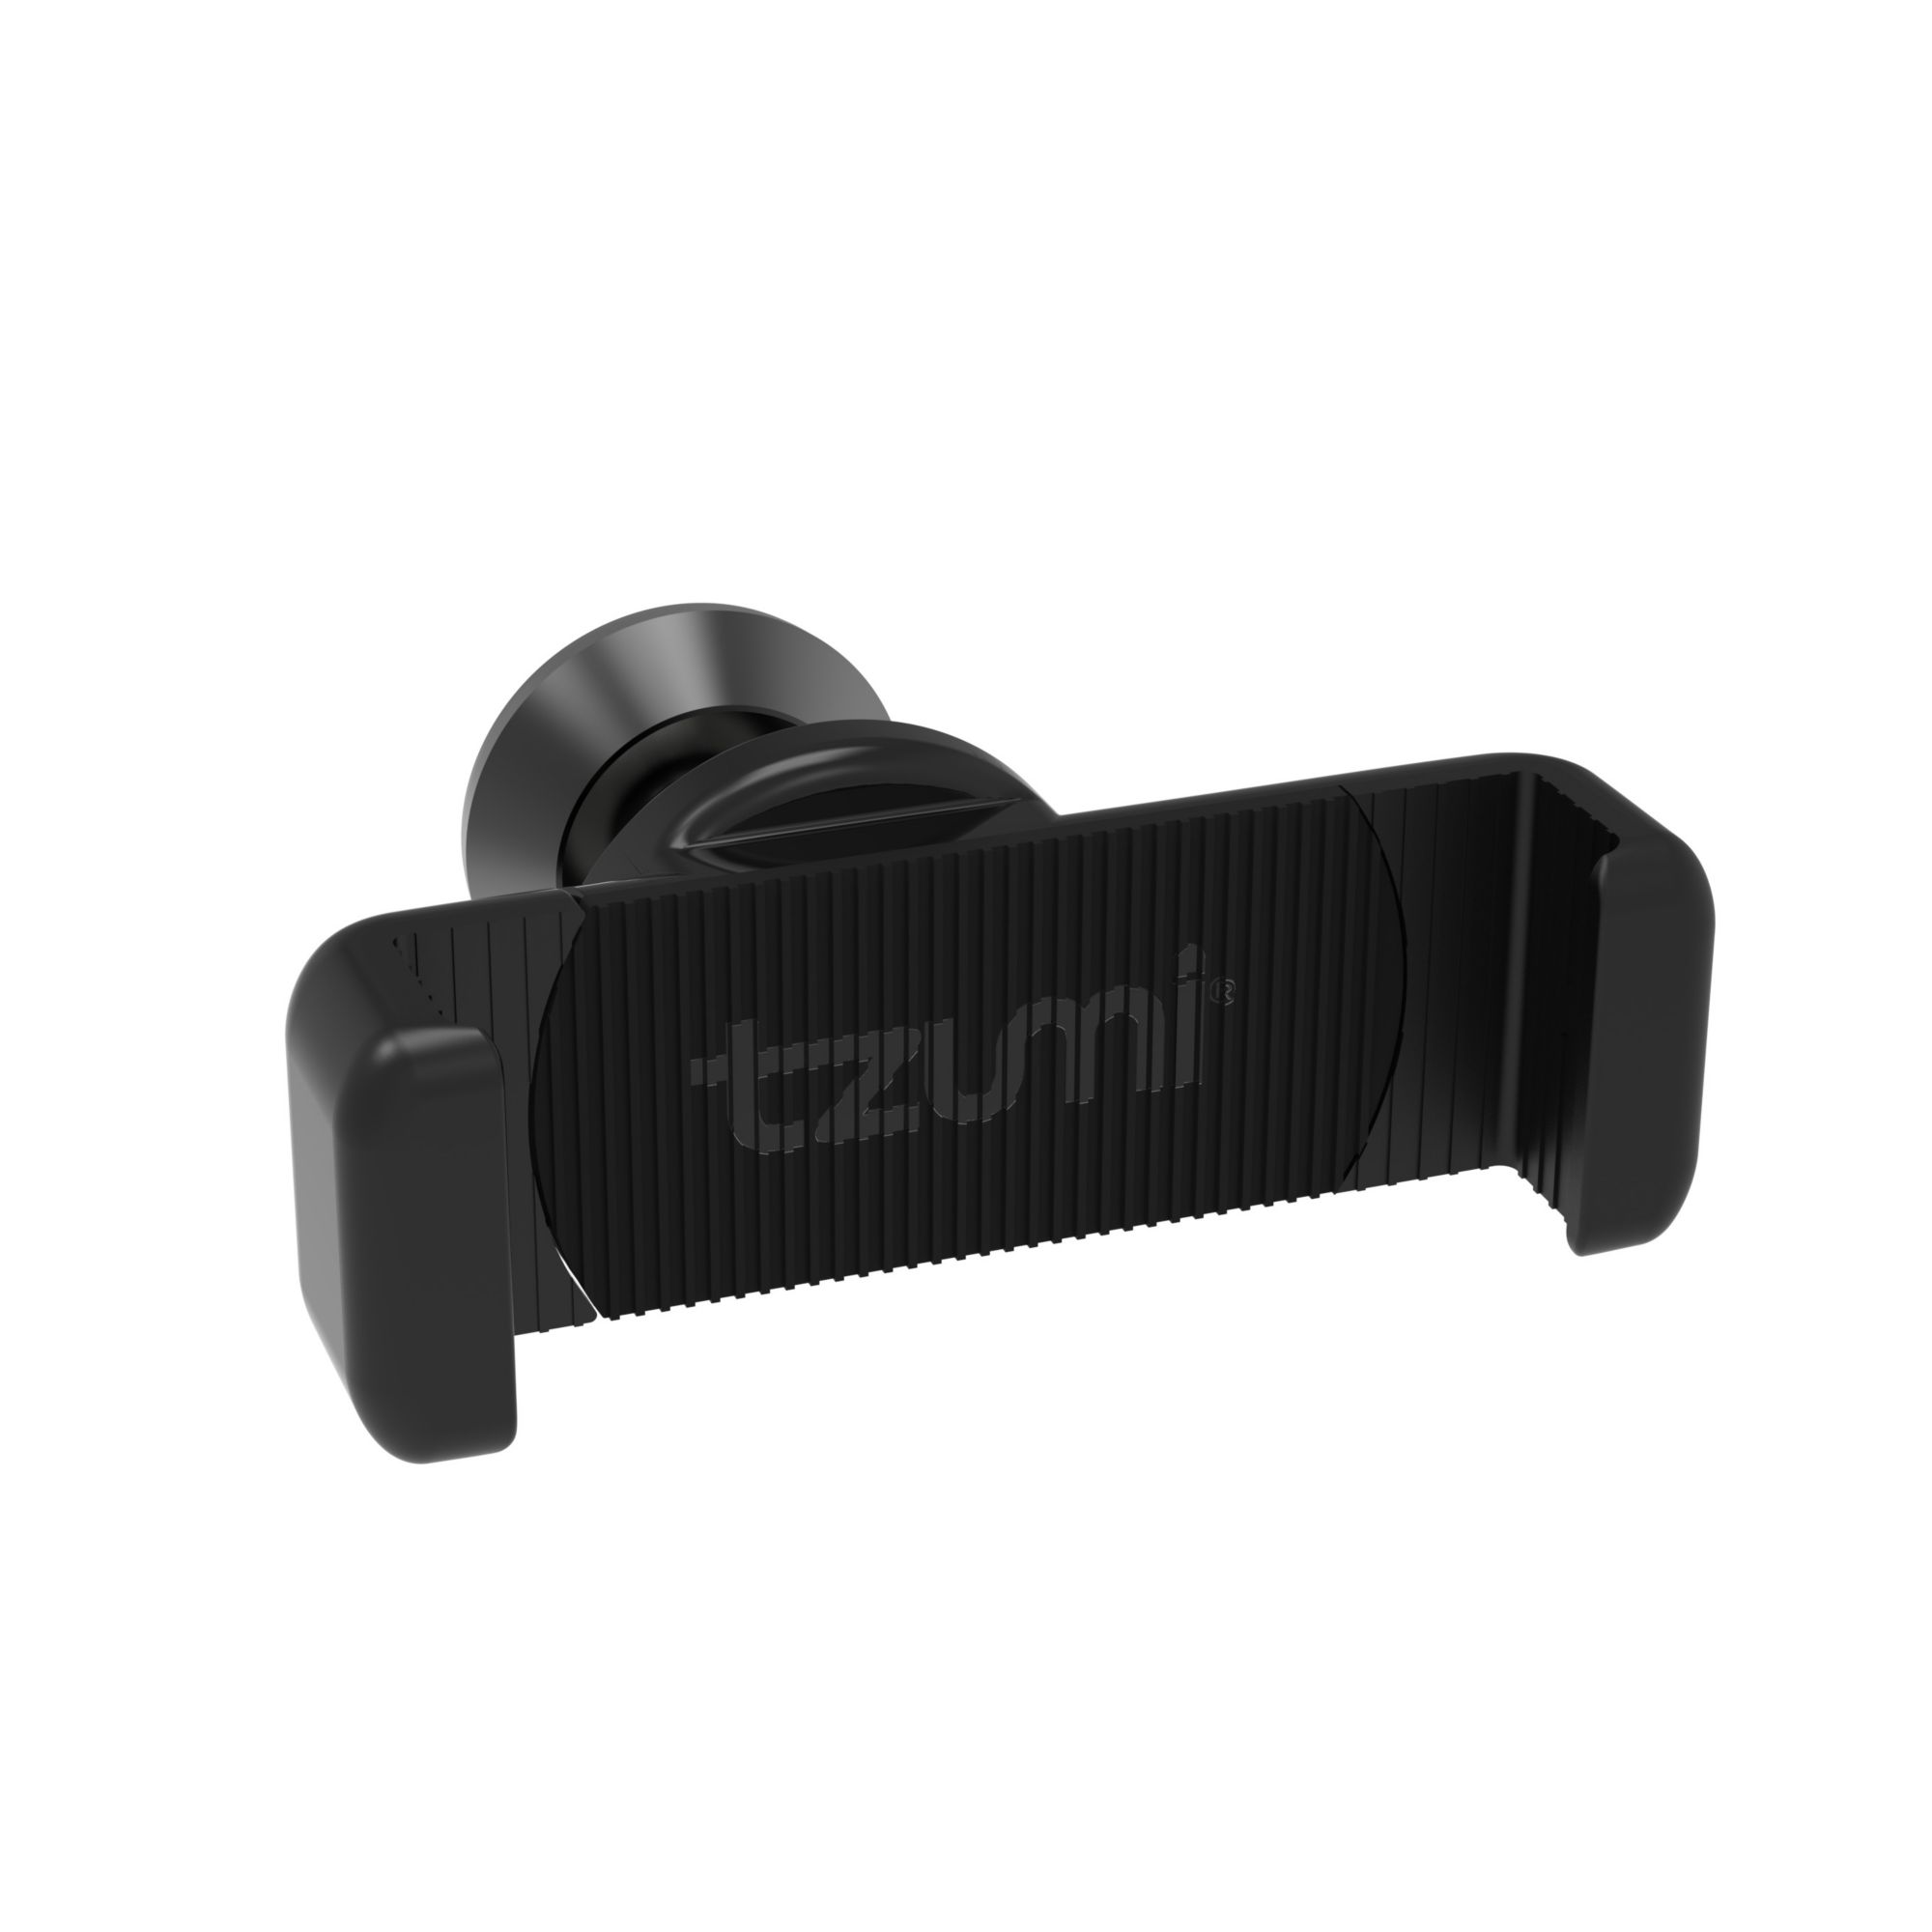 Celly Car Holder Plus Black for Air Vents